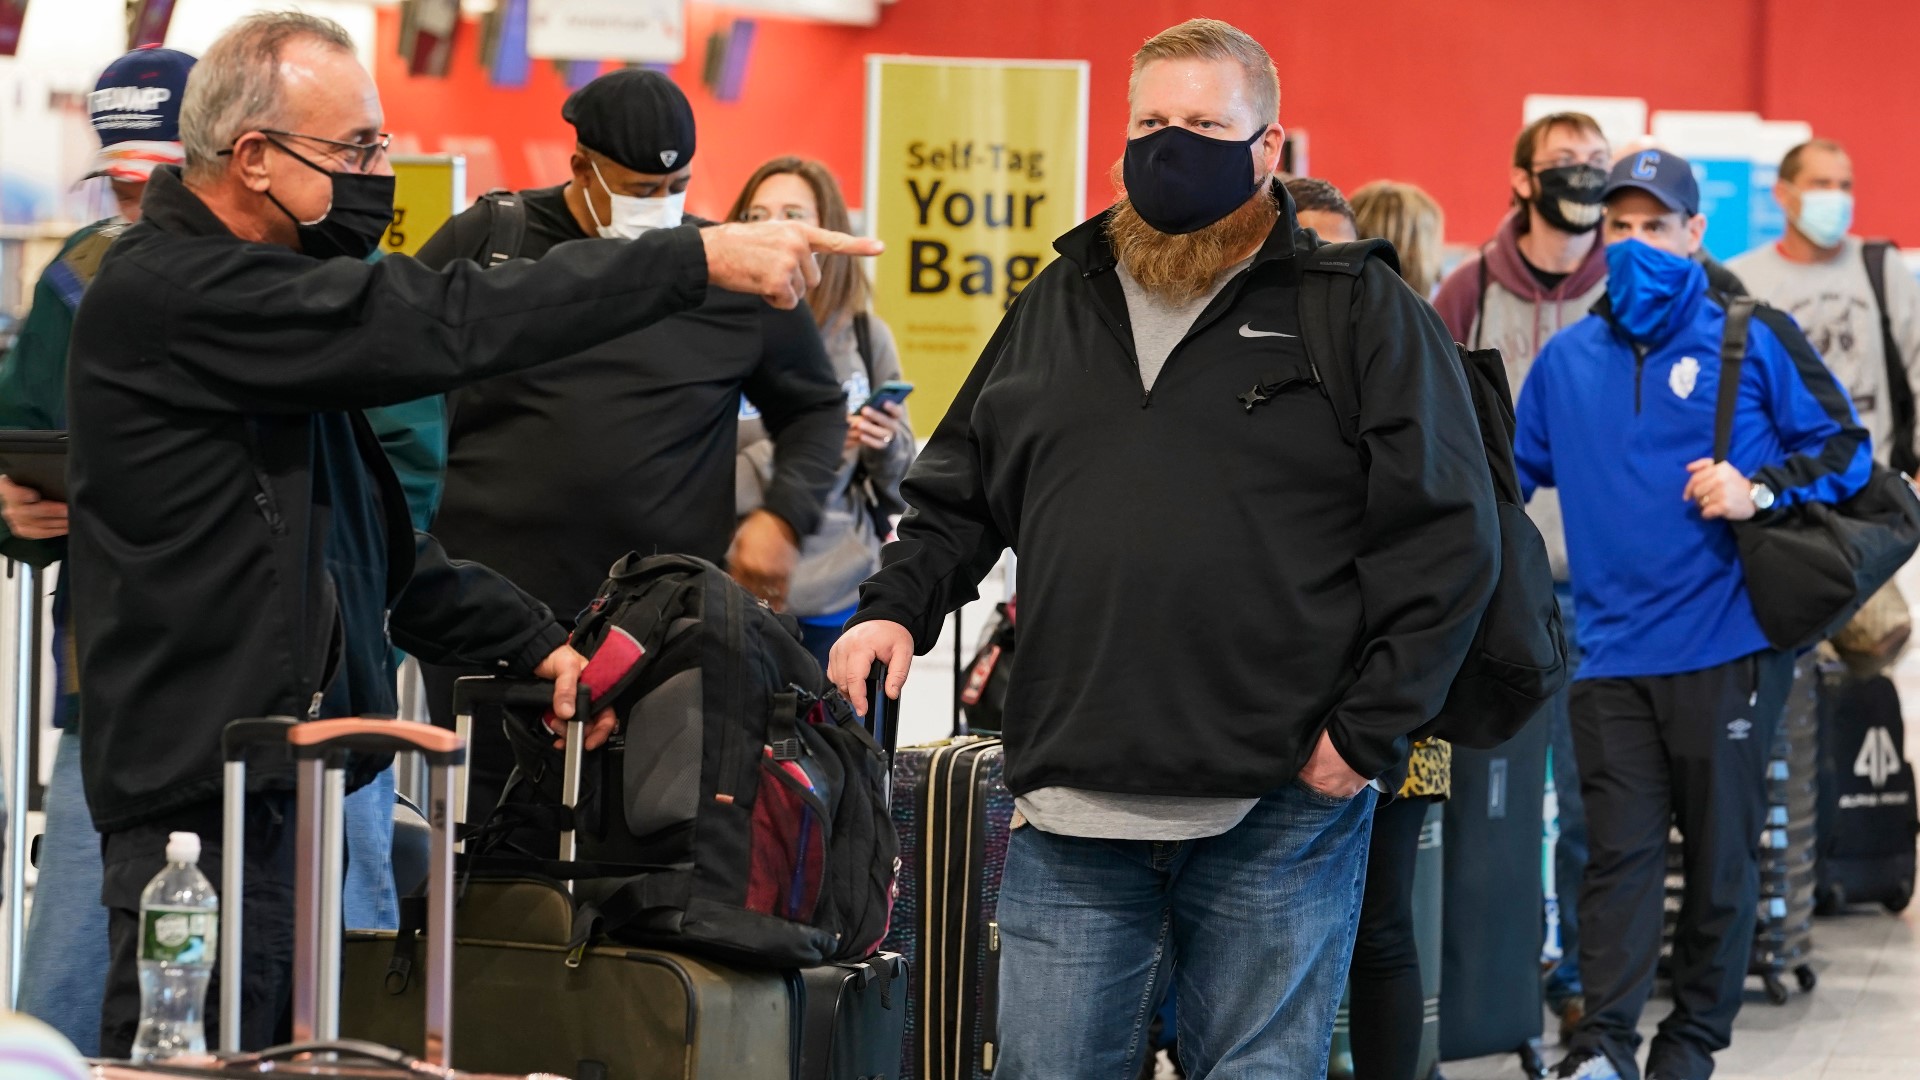 This year, holidays at the airport will look somewhat normal once again. So this means it's time to get ready for long lines, delays and cancellations.